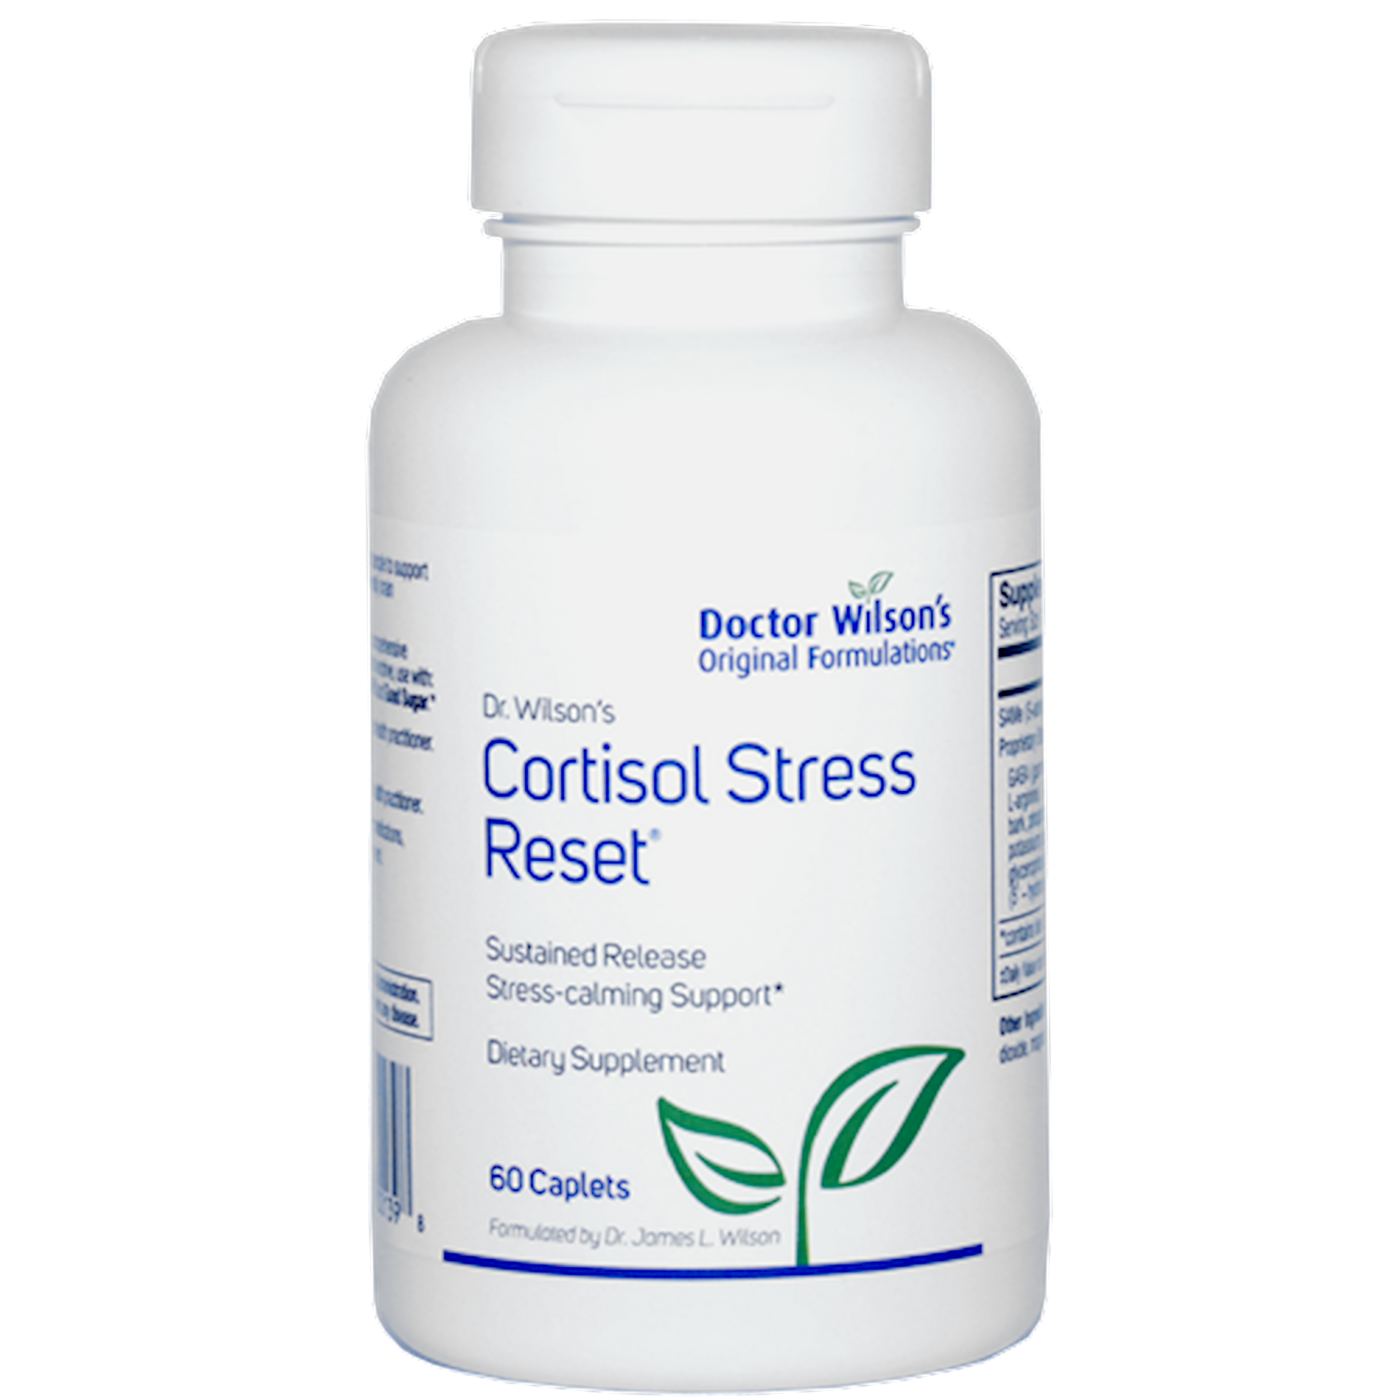 Cortisol Stress Reset s Curated Wellness